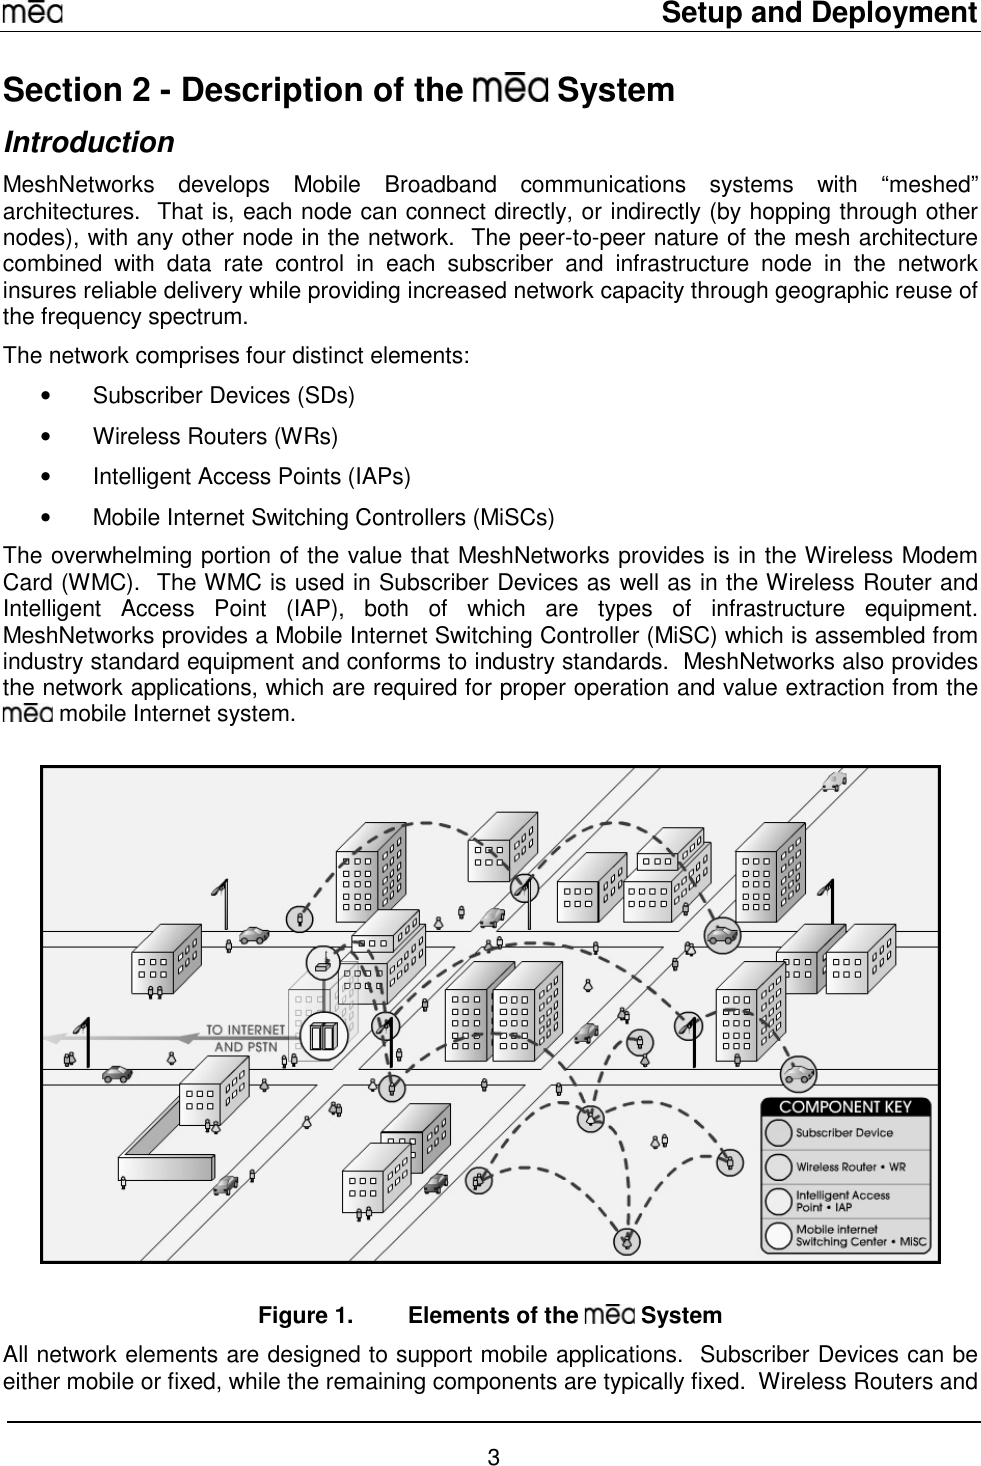     Setup and Deployment  3 Section 2 - Description of the   System Introduction MeshNetworks develops Mobile Broadband communications systems with “meshed” architectures.  That is, each node can connect directly, or indirectly (by hopping through other nodes), with any other node in the network.  The peer-to-peer nature of the mesh architecture combined with data rate control in each subscriber and infrastructure node in the network insures reliable delivery while providing increased network capacity through geographic reuse of the frequency spectrum. The network comprises four distinct elements: •  Subscriber Devices (SDs)  •  Wireless Routers (WRs) •  Intelligent Access Points (IAPs) •  Mobile Internet Switching Controllers (MiSCs) The overwhelming portion of the value that MeshNetworks provides is in the Wireless Modem Card (WMC).  The WMC is used in Subscriber Devices as well as in the Wireless Router and Intelligent Access Point (IAP), both of which are types of infrastructure equipment.  MeshNetworks provides a Mobile Internet Switching Controller (MiSC) which is assembled from industry standard equipment and conforms to industry standards.  MeshNetworks also provides the network applications, which are required for proper operation and value extraction from the  mobile Internet system.     Figure 1.  Elements of the   System All network elements are designed to support mobile applications.  Subscriber Devices can be either mobile or fixed, while the remaining components are typically fixed.  Wireless Routers and 